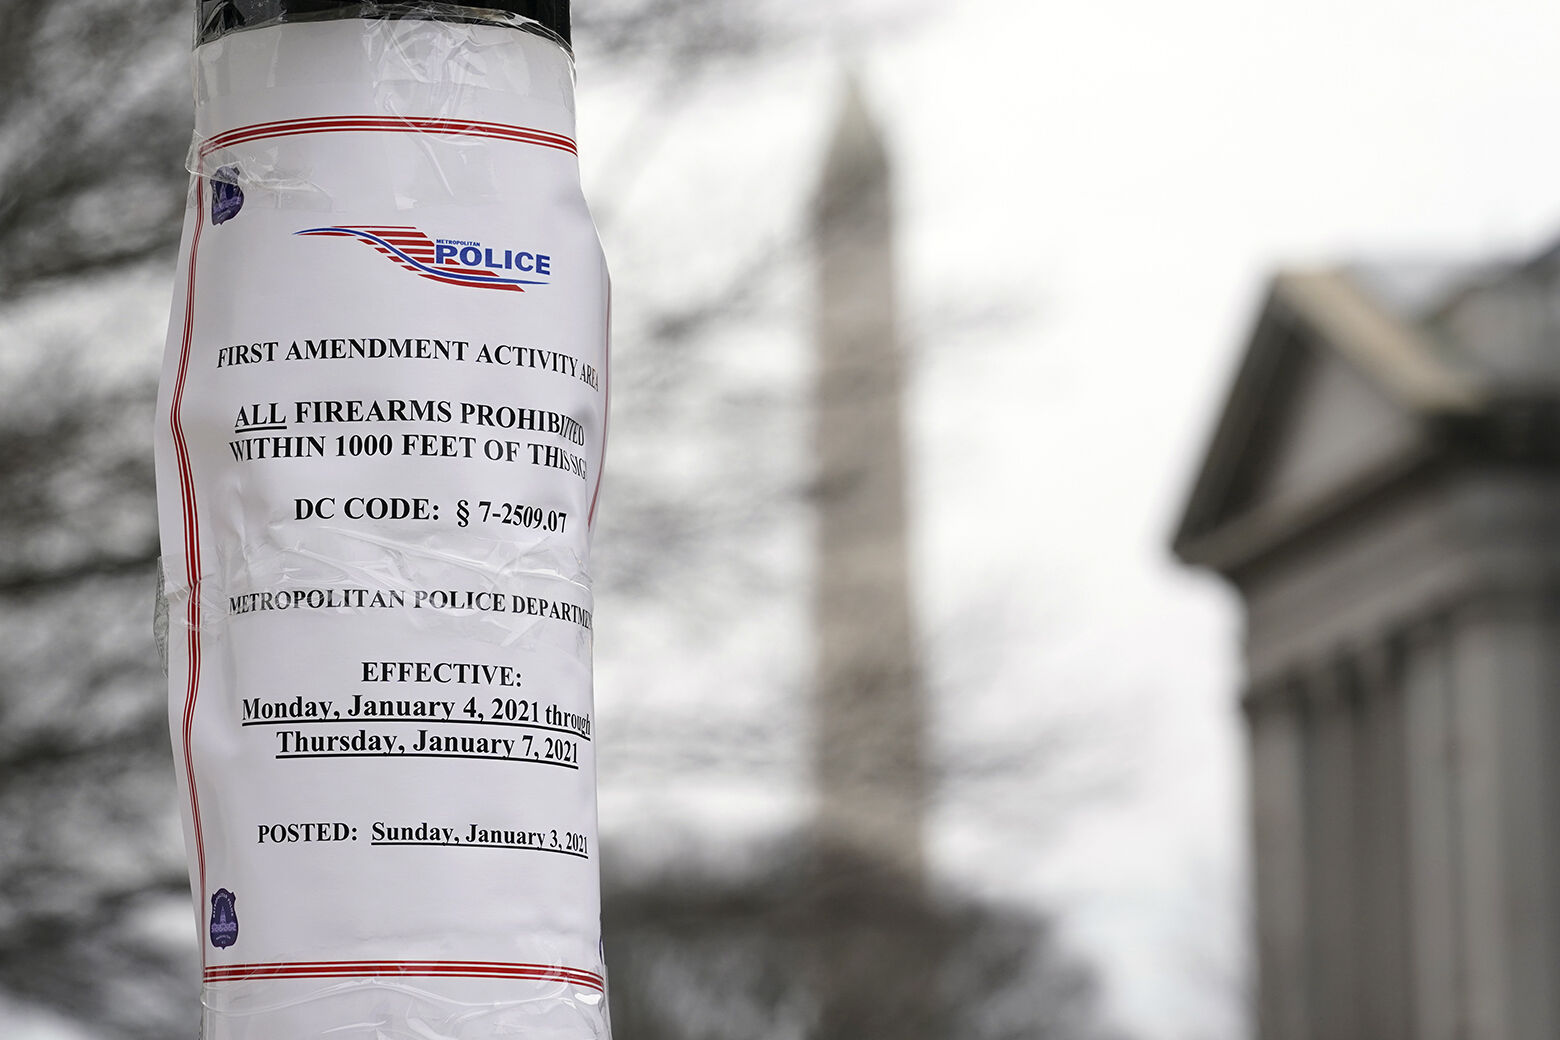 A sign is posted near the White House in Washington, Monday, Jan. 4, 2021, in preparation for a rally on Jan. 6, the day when Congress is scheduled to meet to formally finalize the presidential election results. (AP Photo/Susan Walsh)